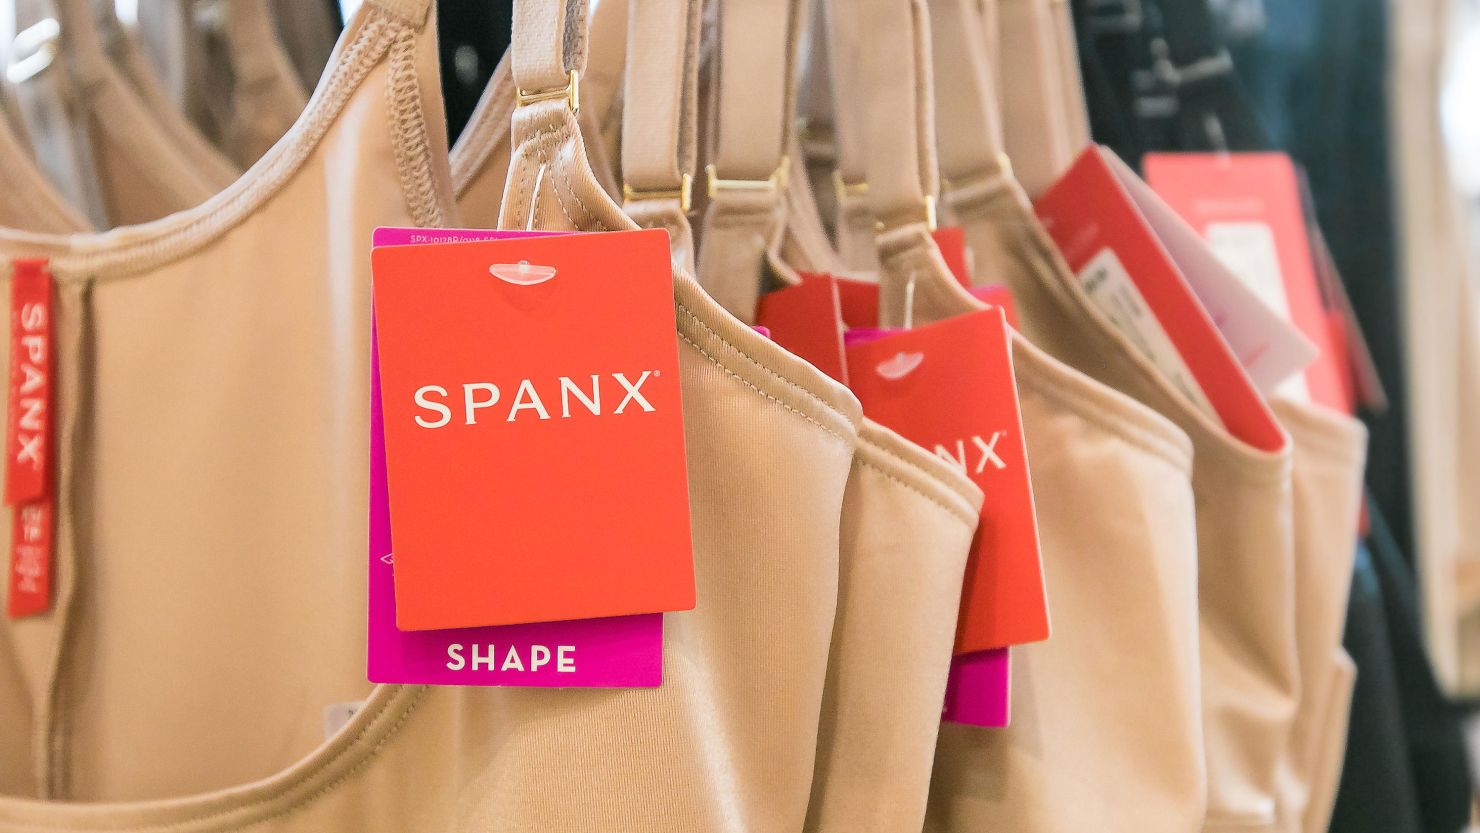 Spanx CEO Jan Singer on rebranding shapewear company to go beyond formal  occasion shapewear - The Business Journals